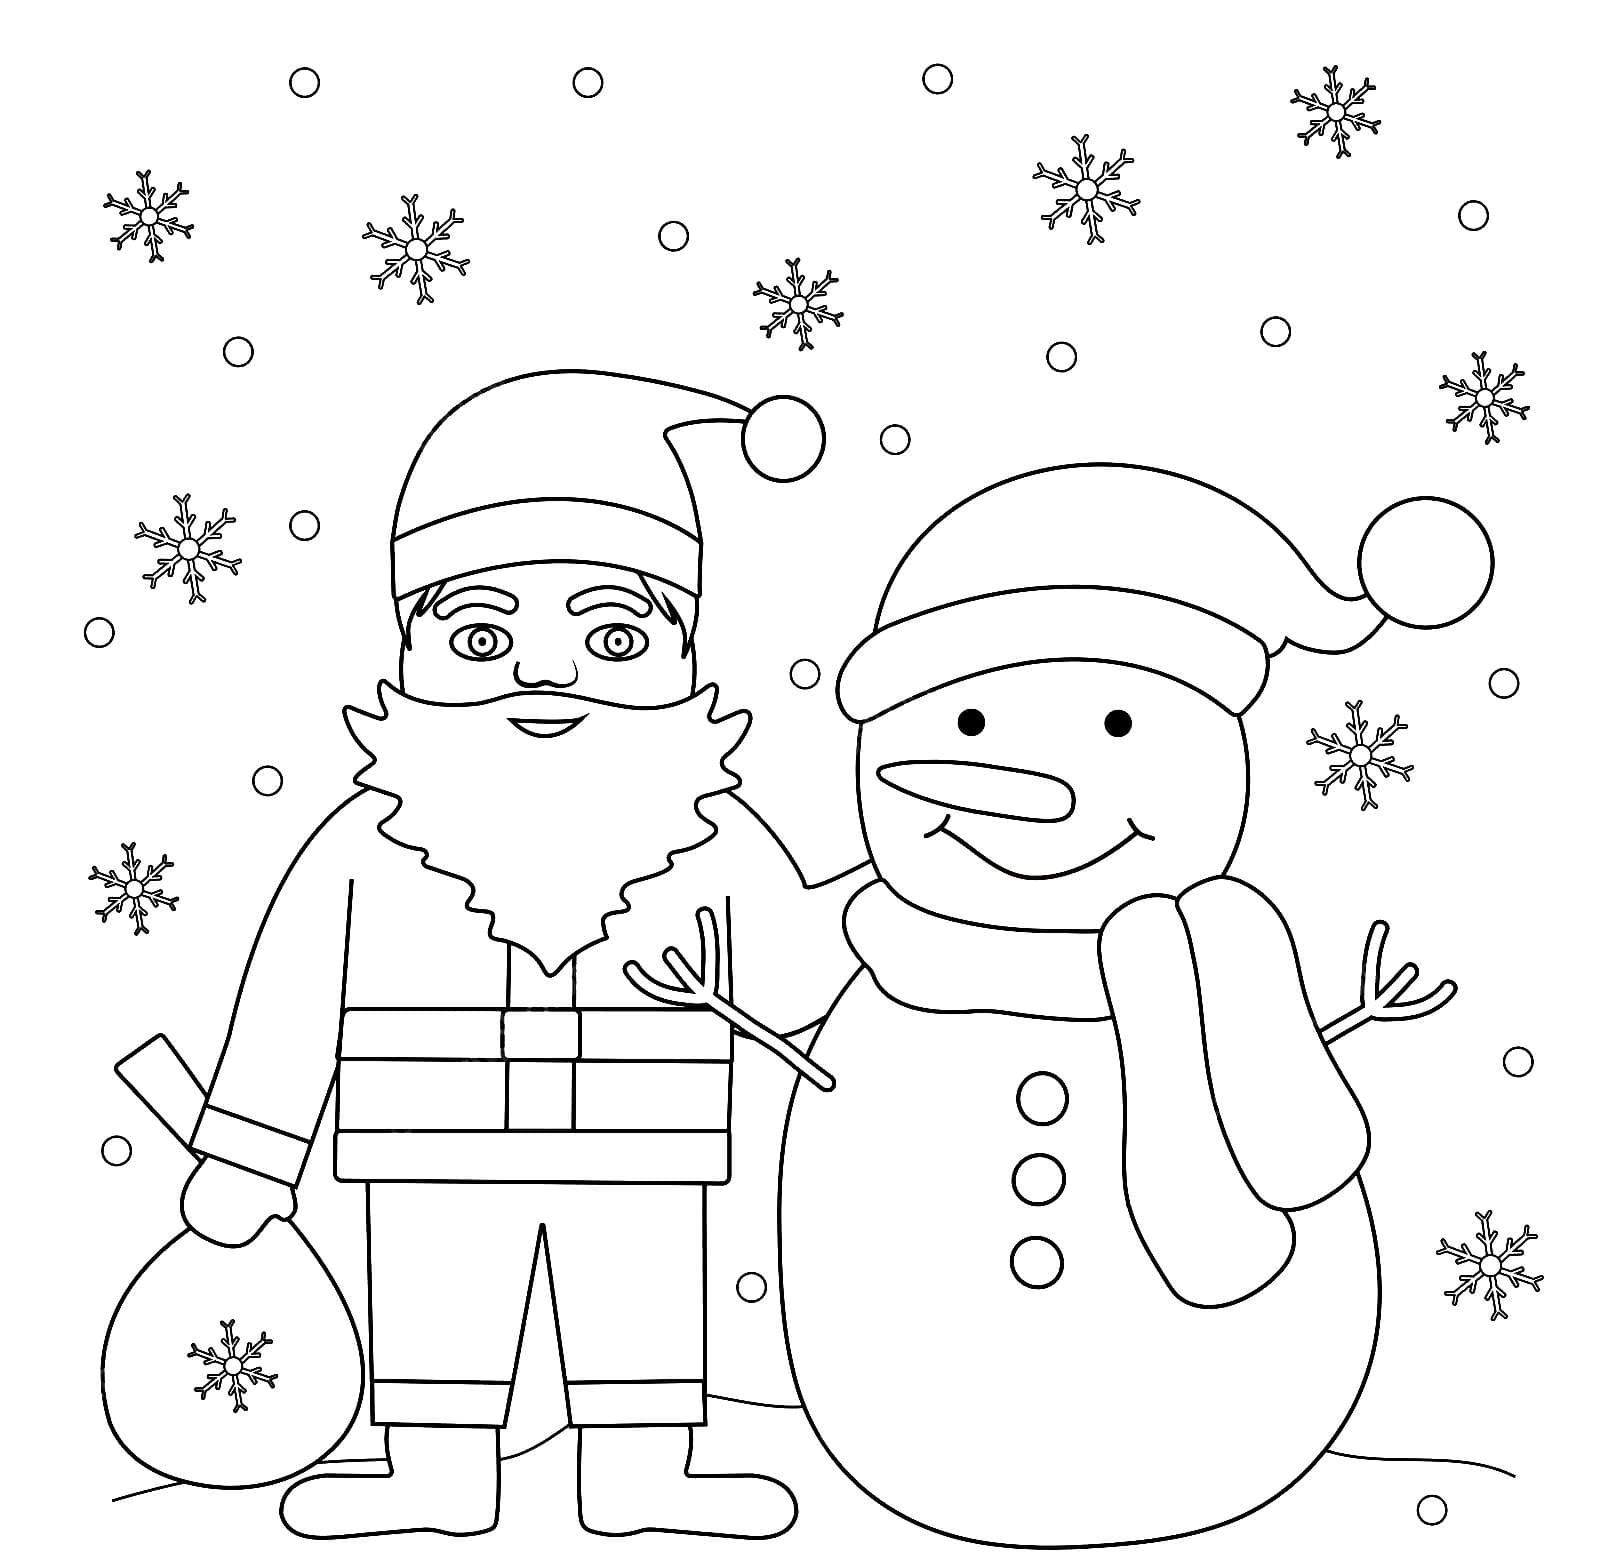 Coloring pages Santa Claus. Print for free | WONDER DAY — Coloring pages for children and adults